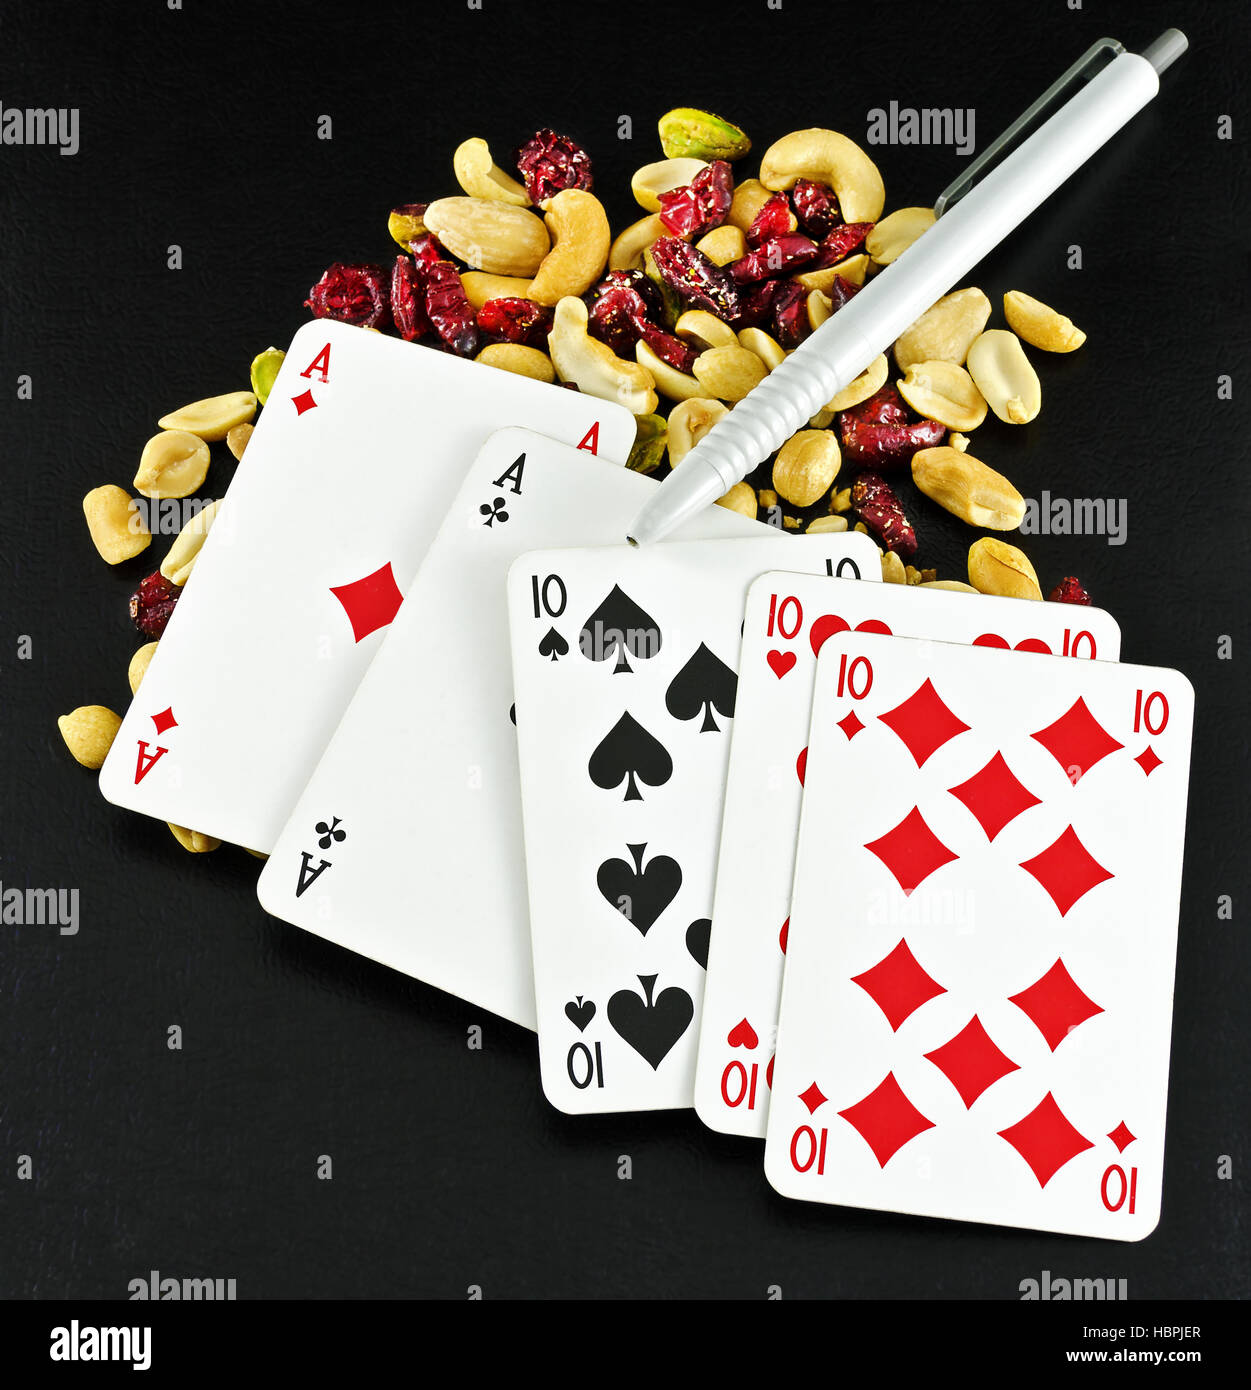 poker hand Fullhouse and student feed Stock Photo